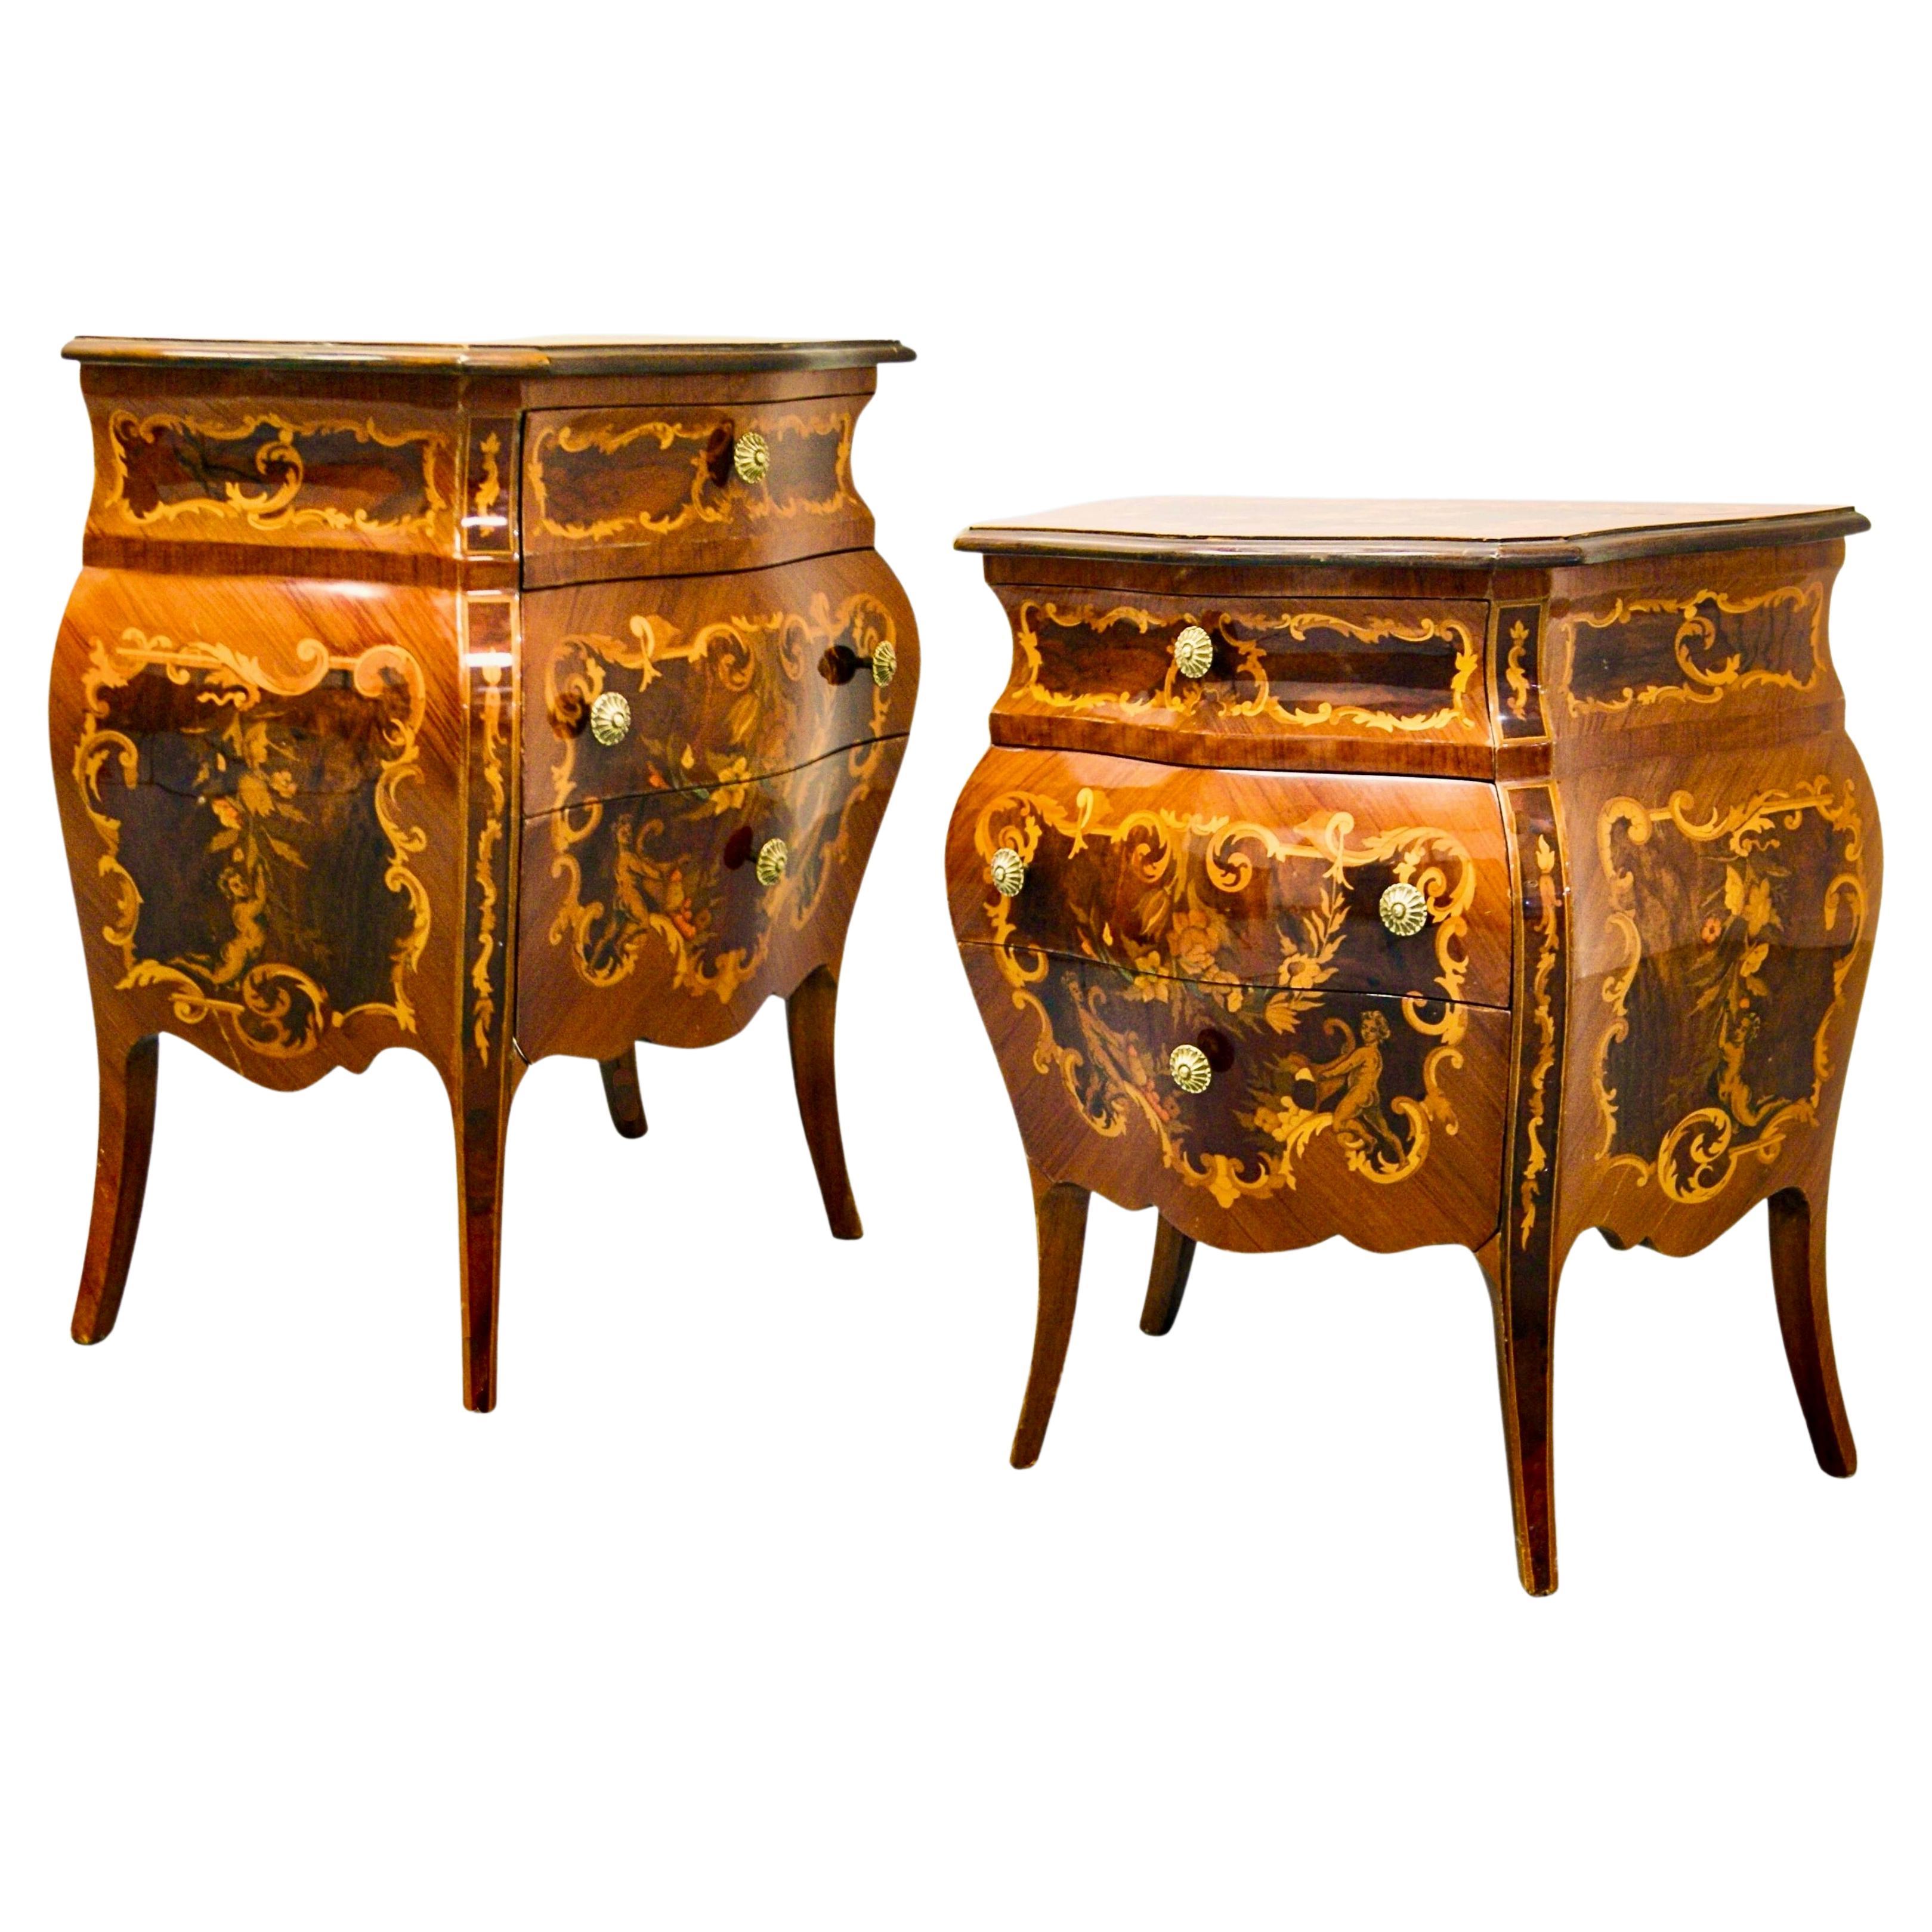 Pair of Italian Mezza Luna Inlaid Marquetry Olivewood Bombe Commodes For Sale